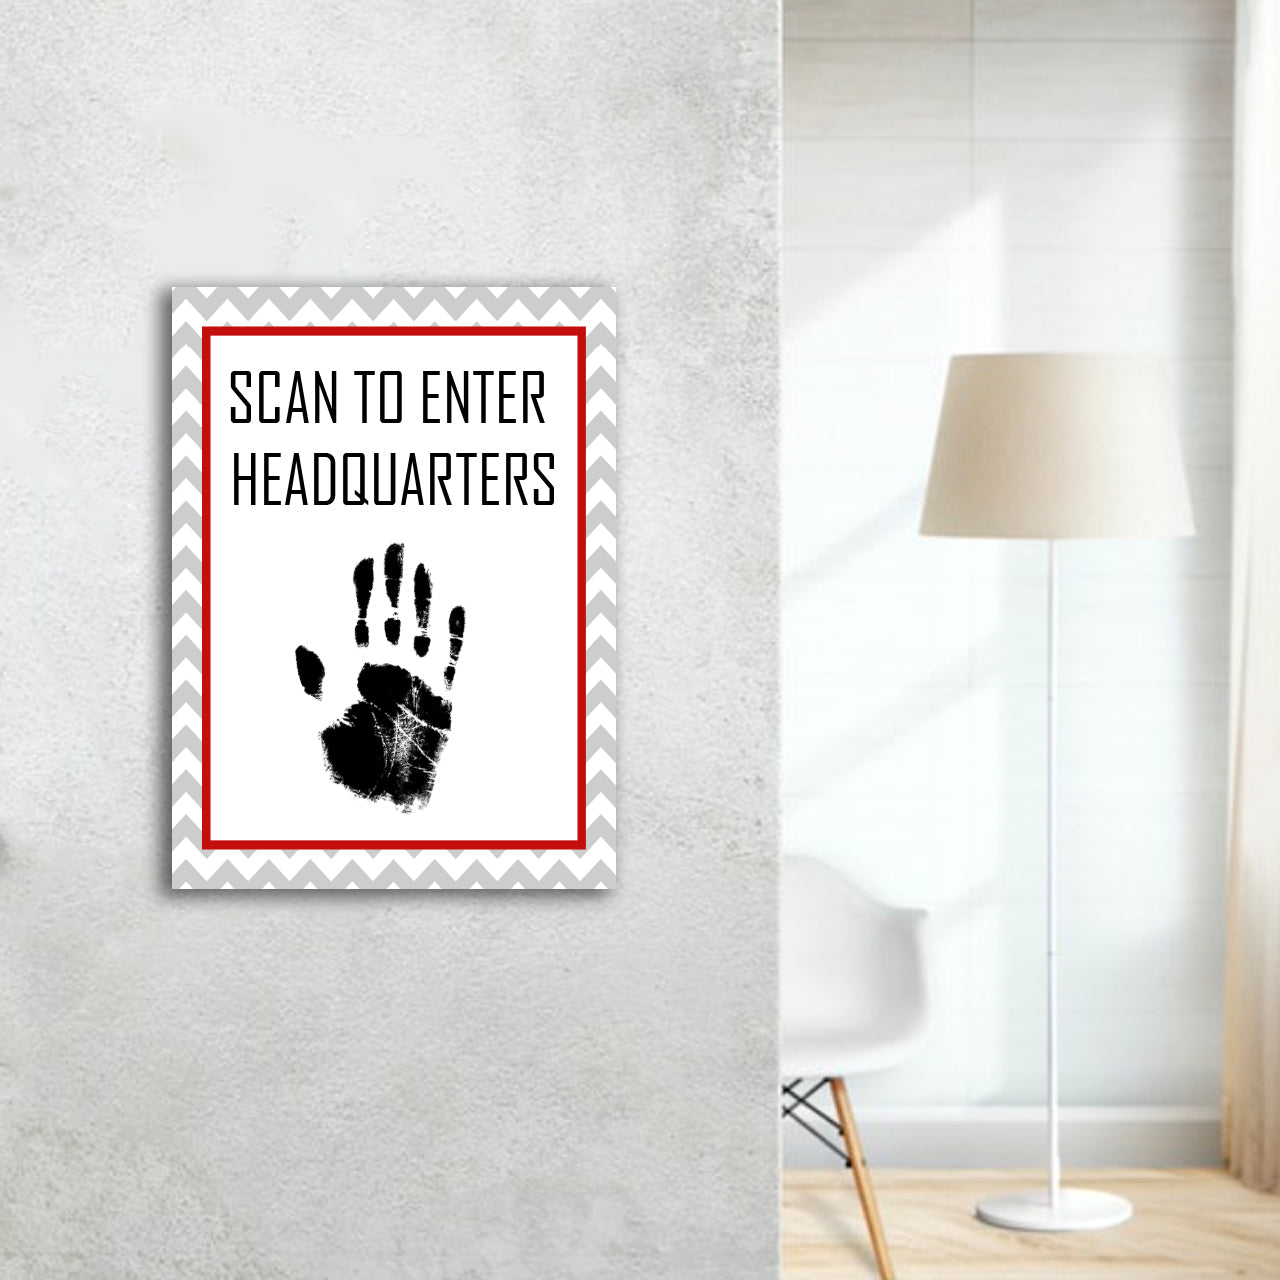 Handprint poster for top secret entry with clearance